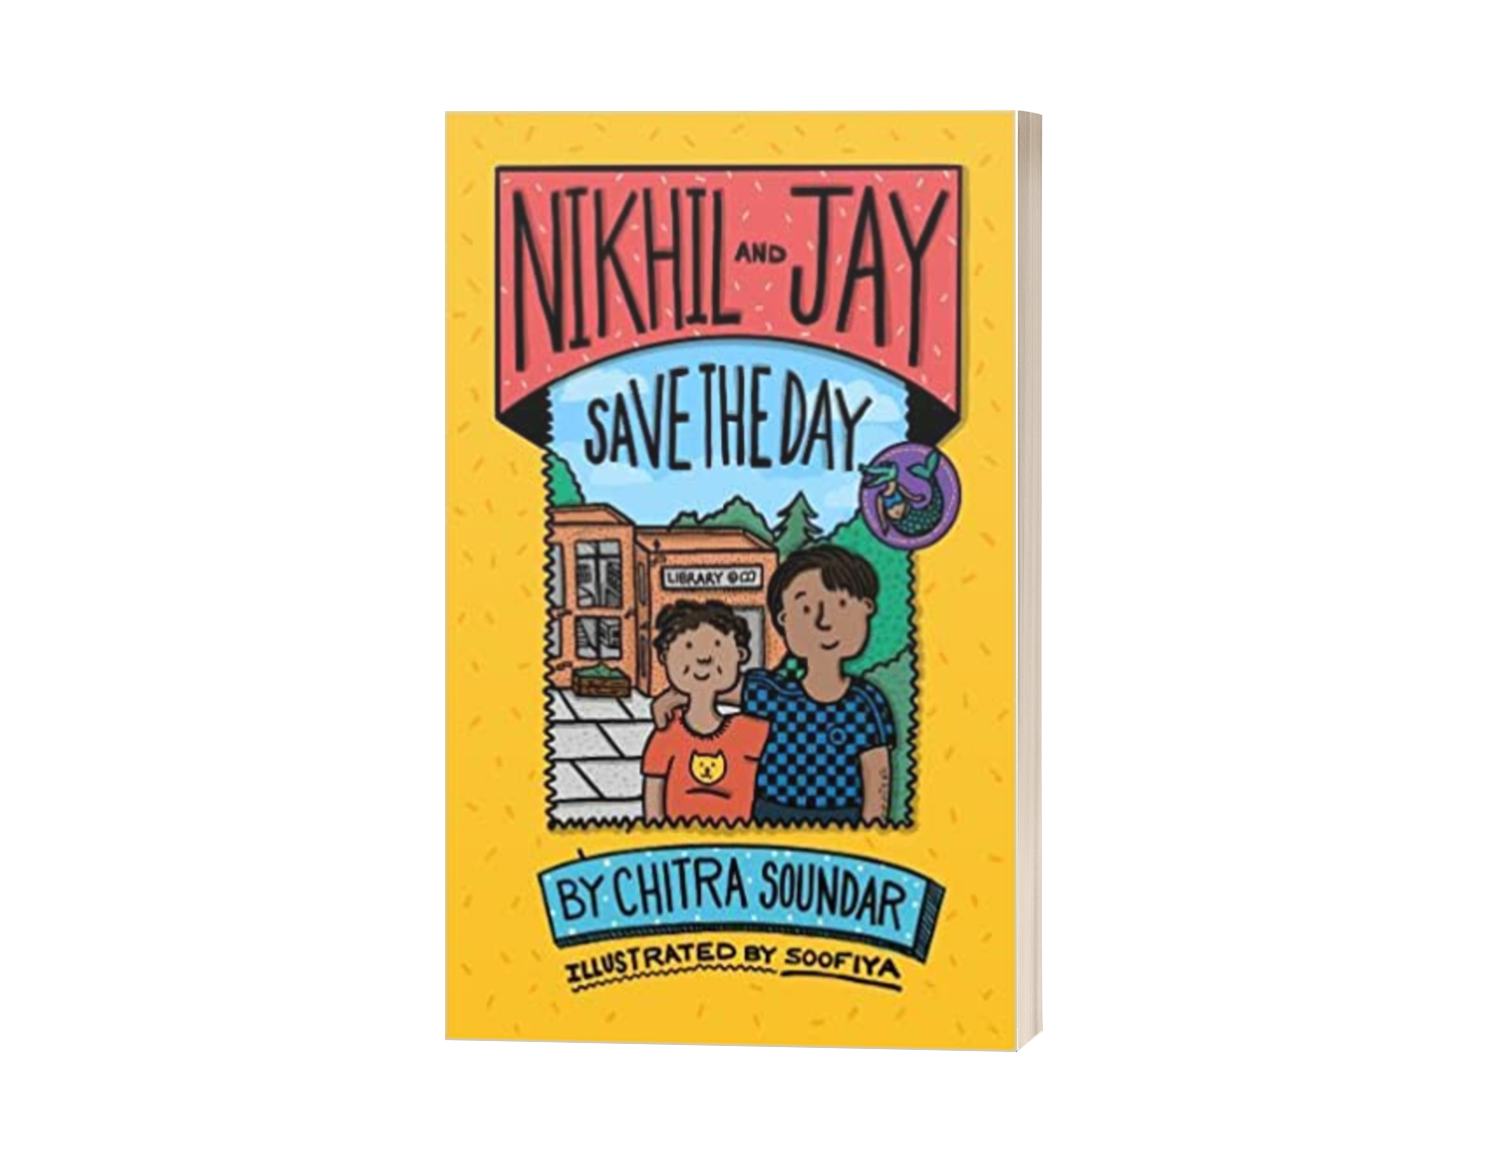 NIKHIL AND JAY SAVE THE DAY